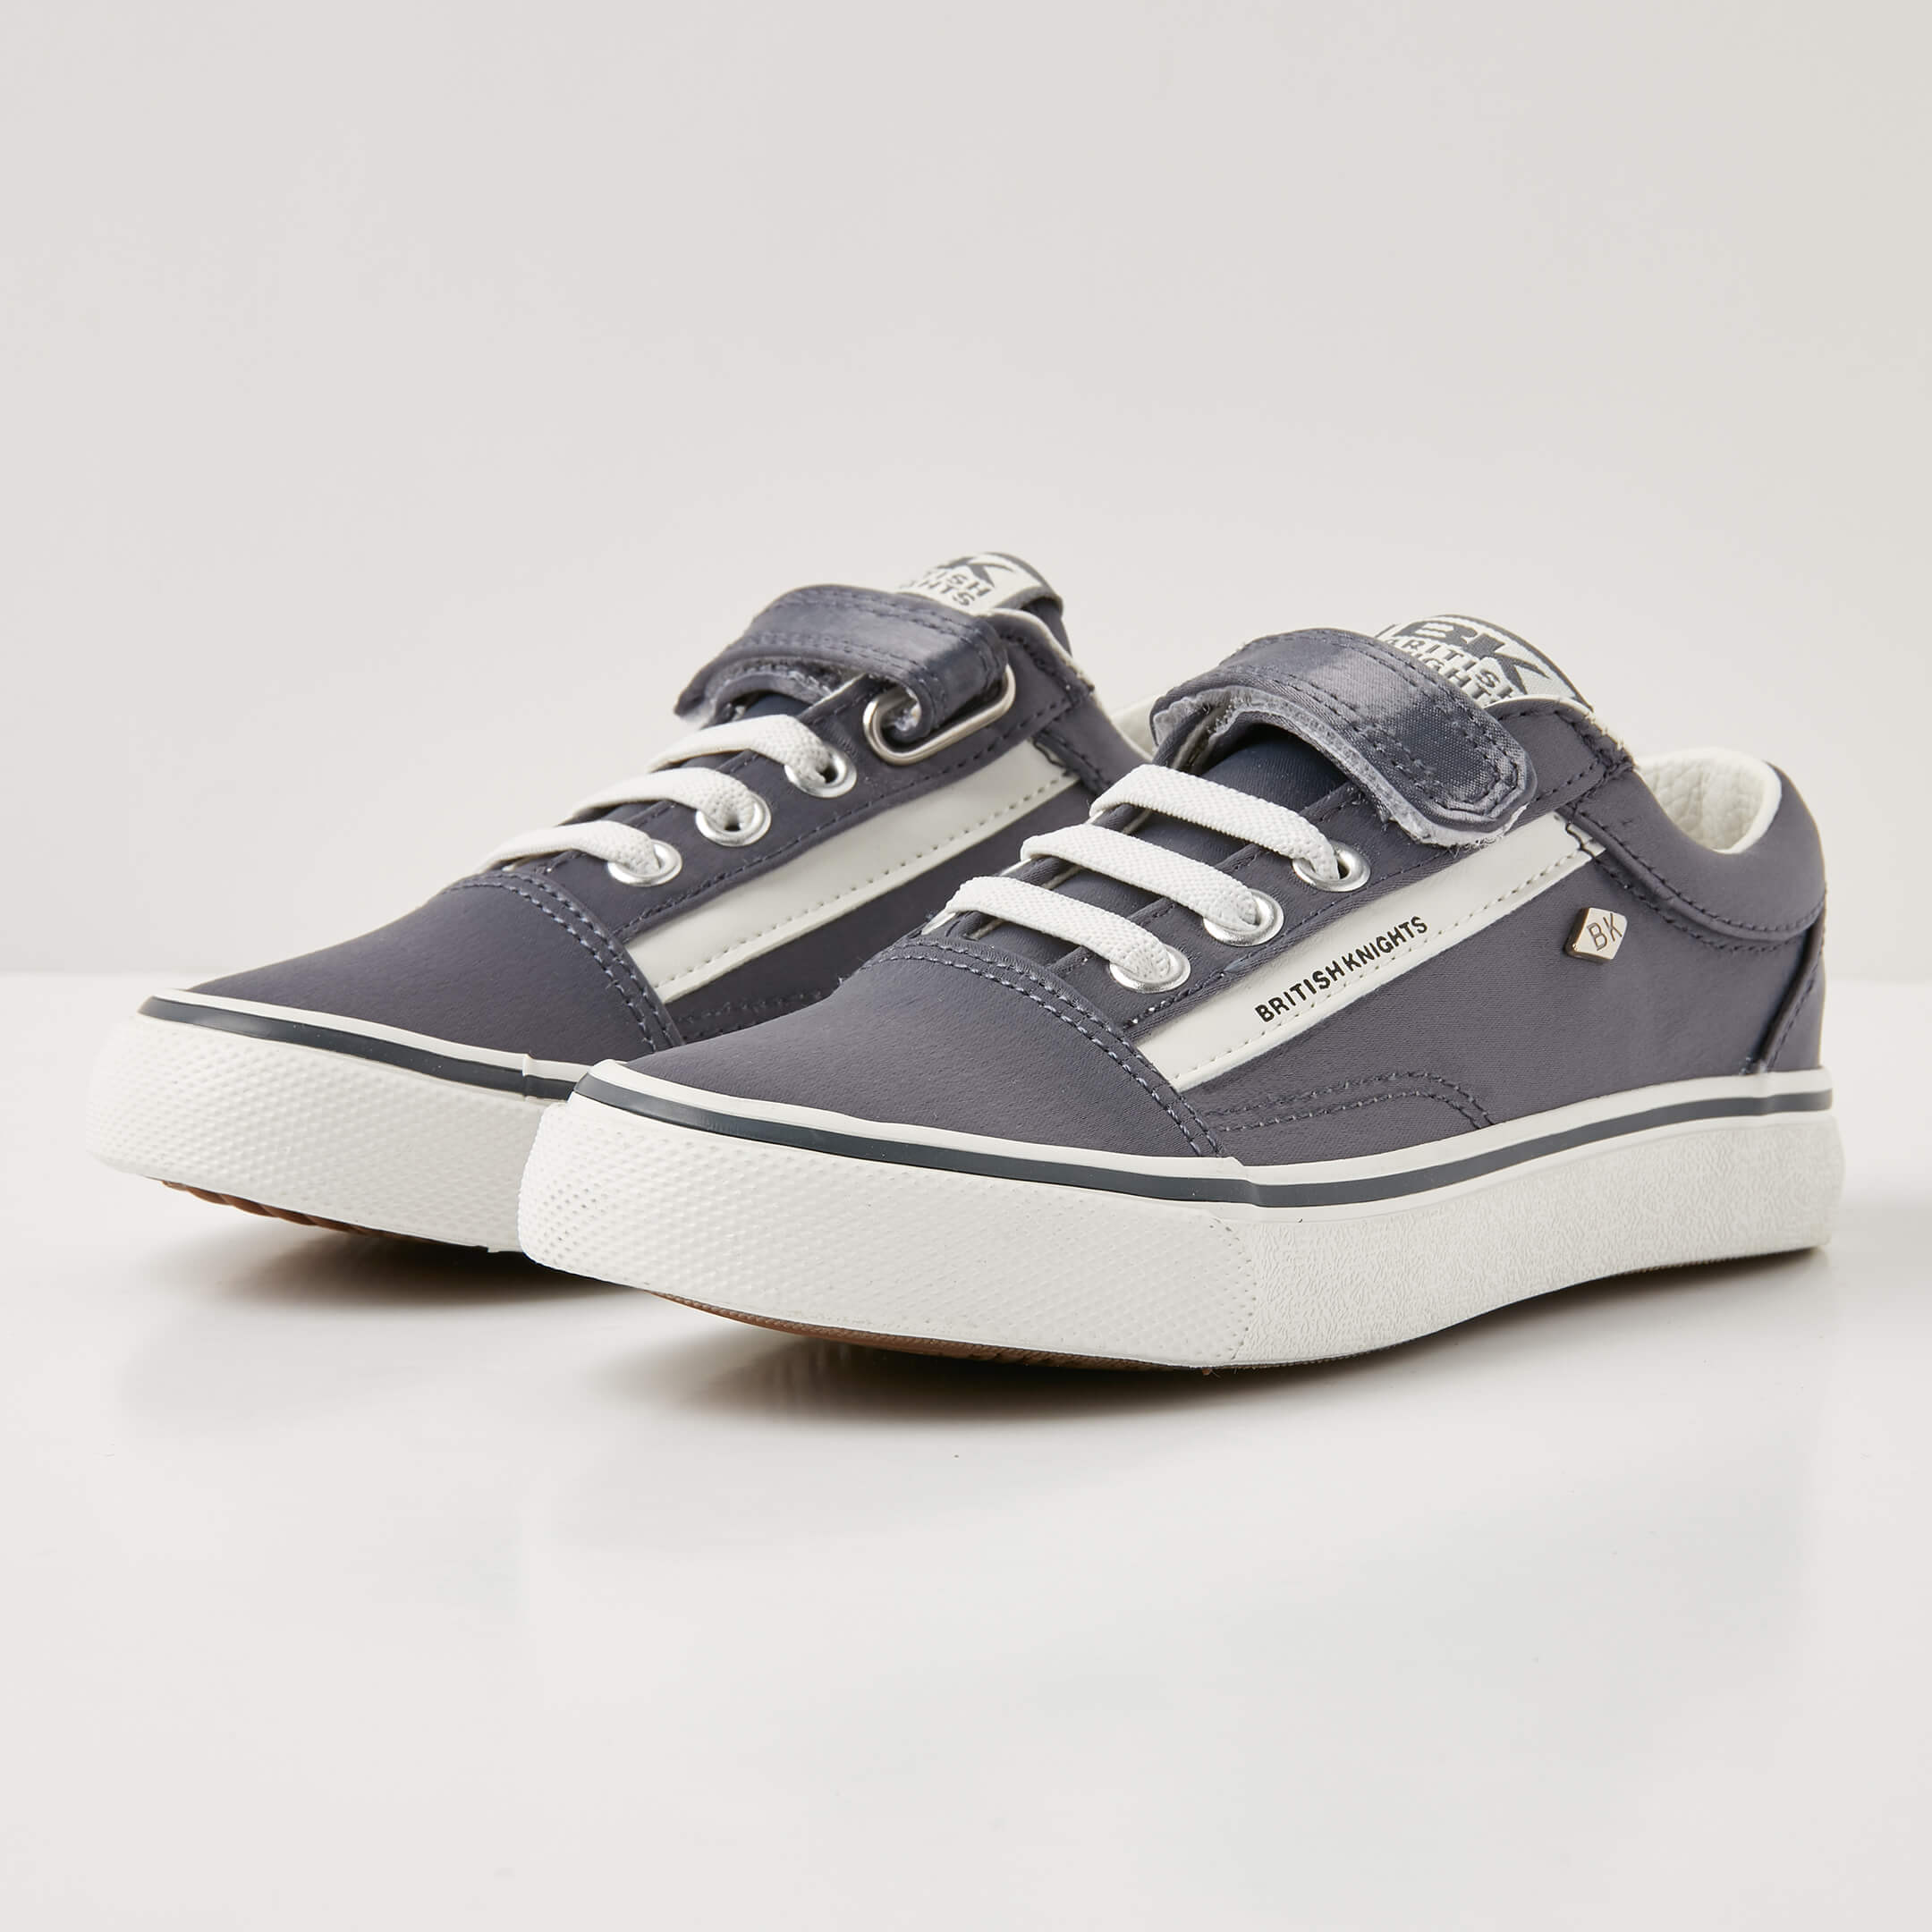 British Knights Sneaker Front view  B43-3741C-03 MACK LOW-TOP FEMALE